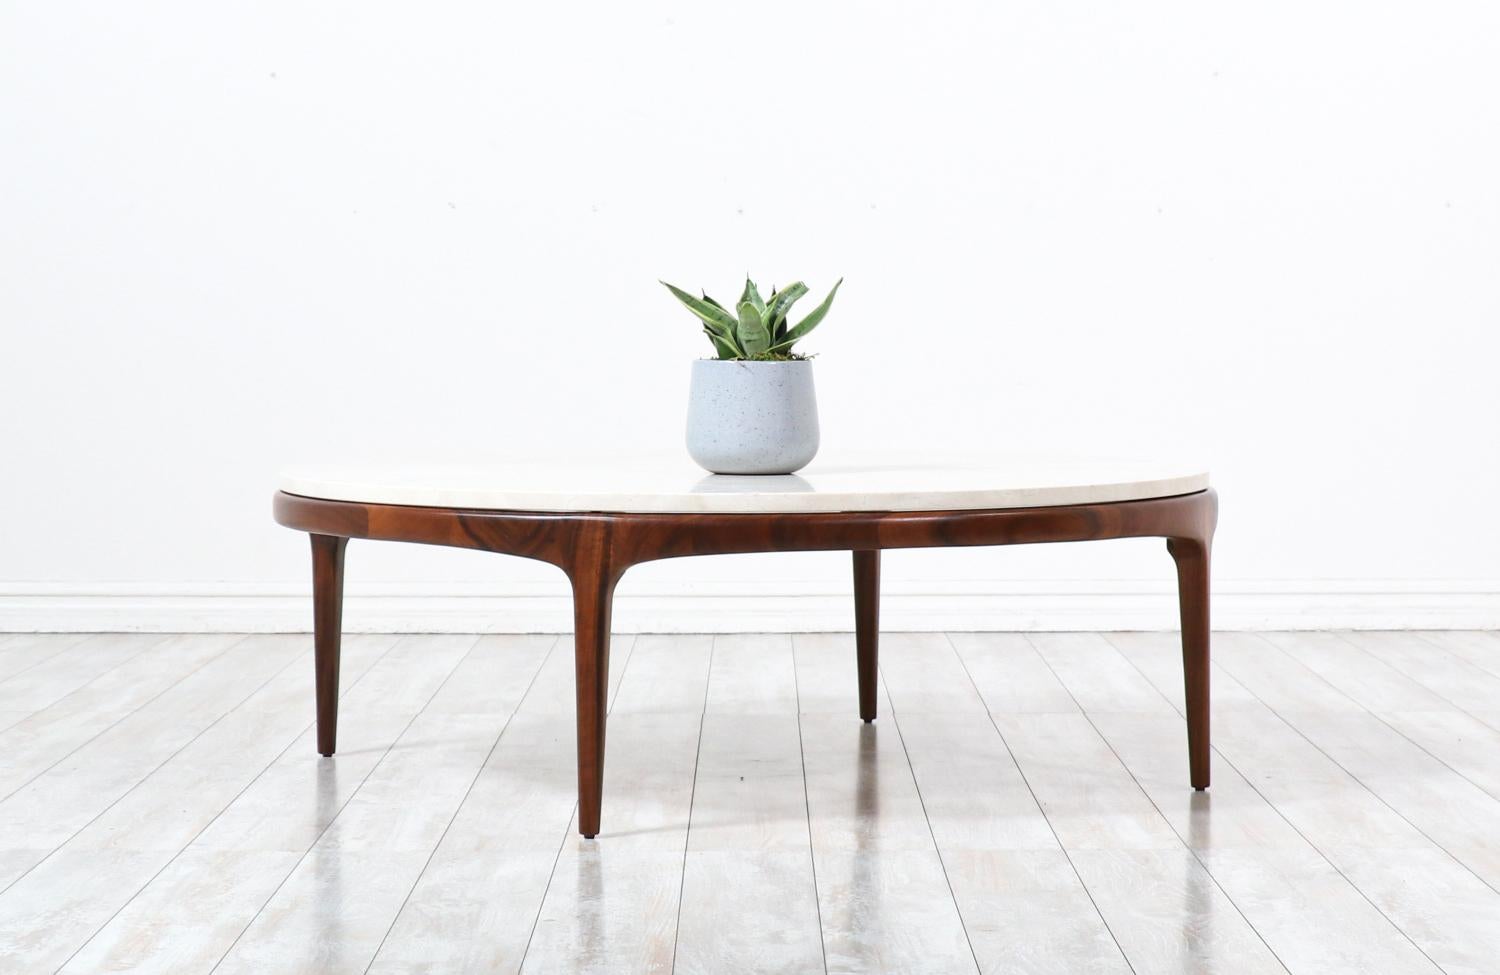 Mid-Century Modern “Rythm” coffee table with Crema Marfil Stone Top by Lane.